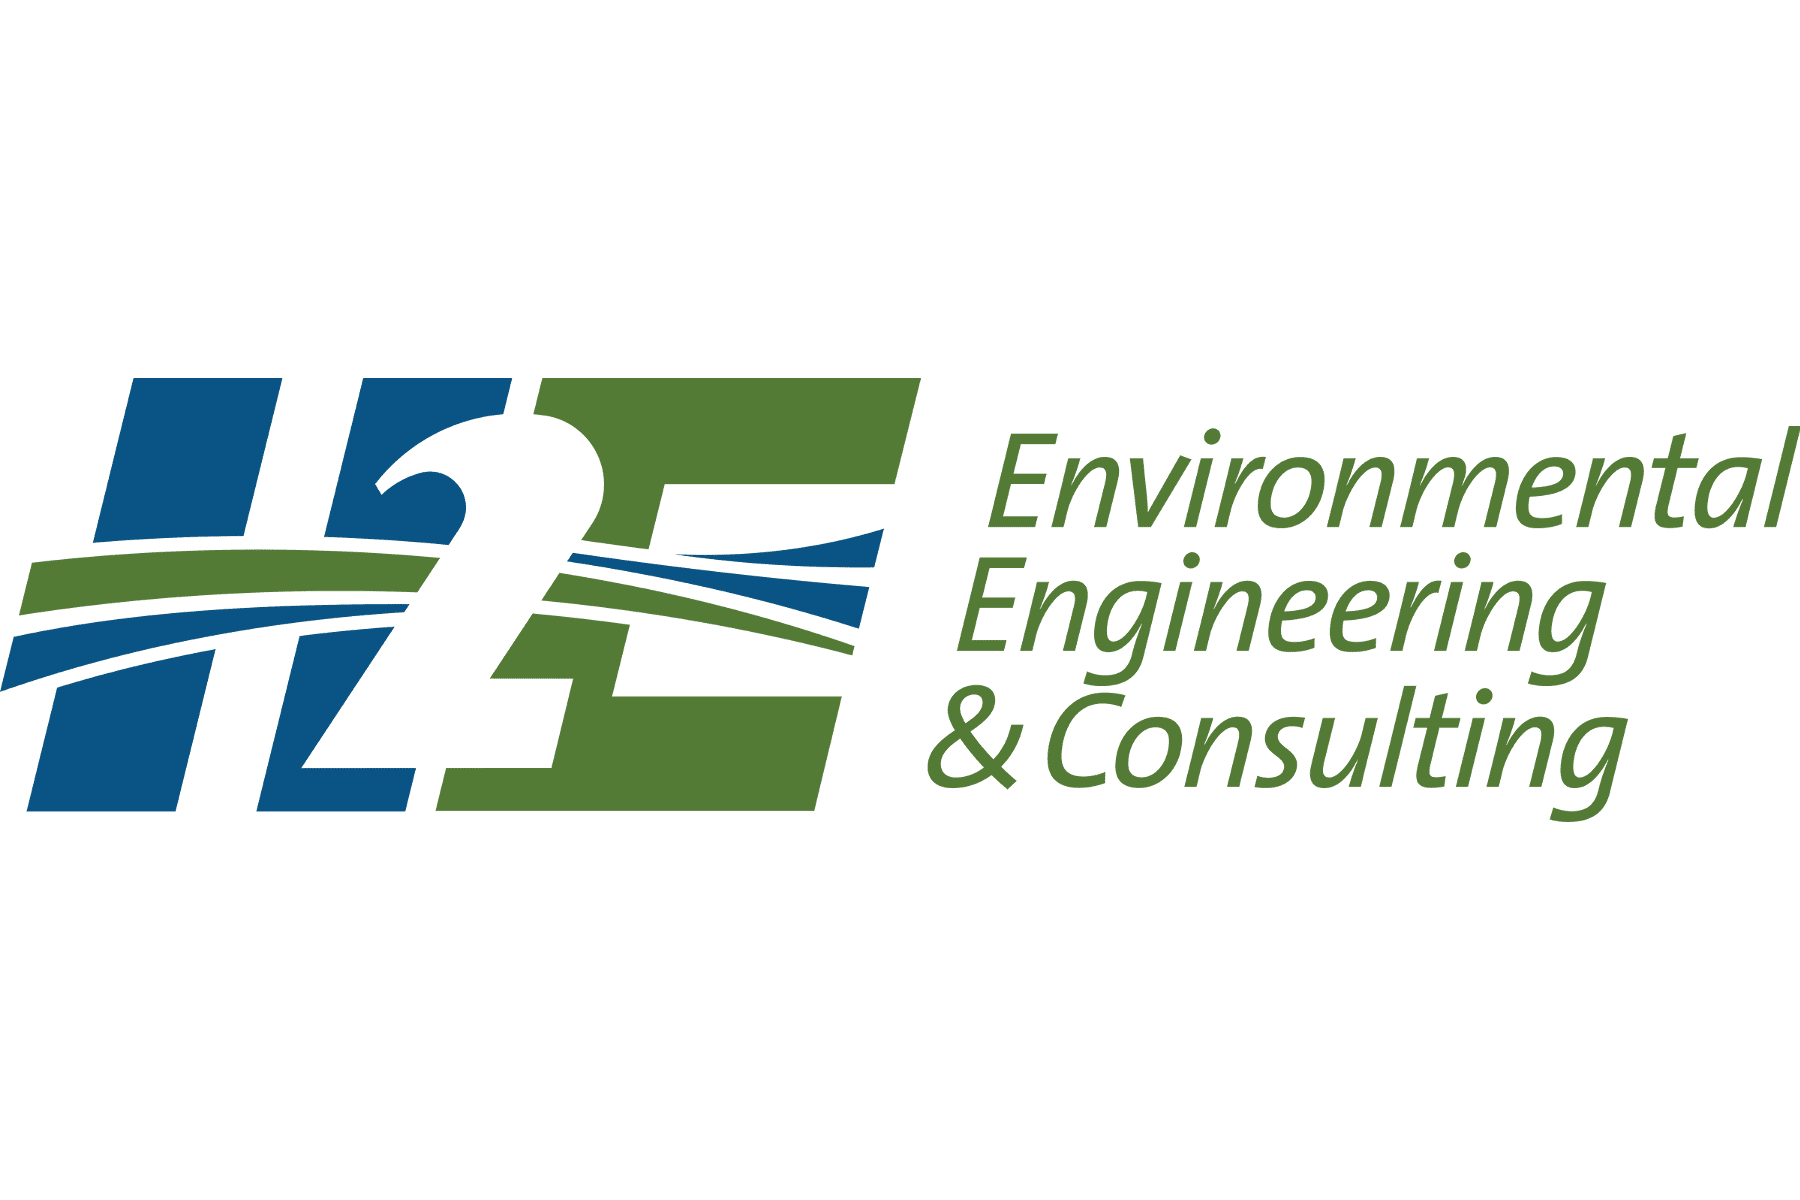 Environmental Engineering & Consulting